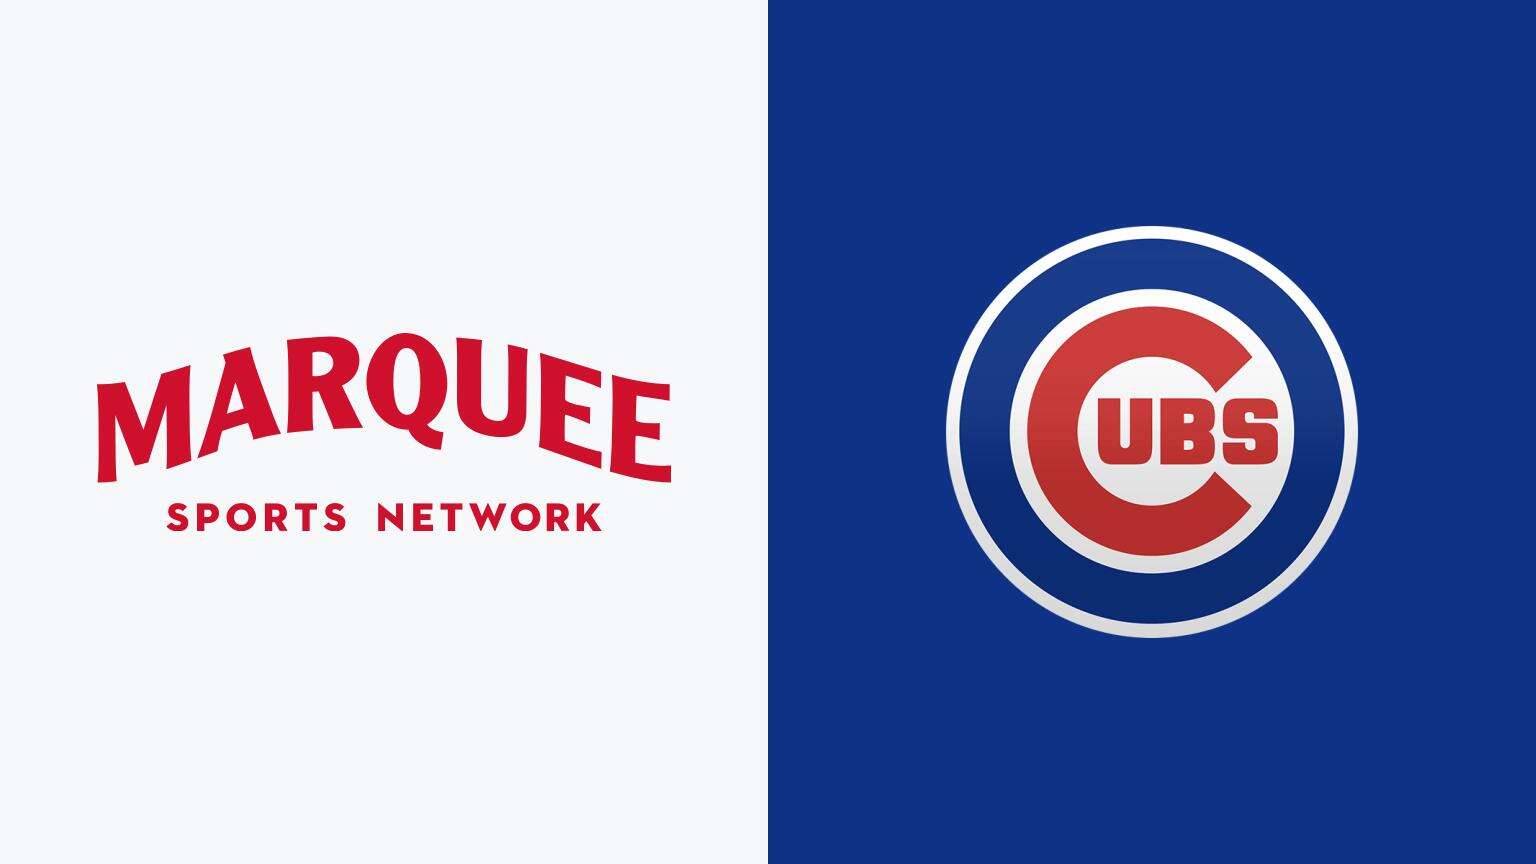 Everything You Need to Know About Chicago Cubs, Marquee Sports Networks New In-Market Streaming Service